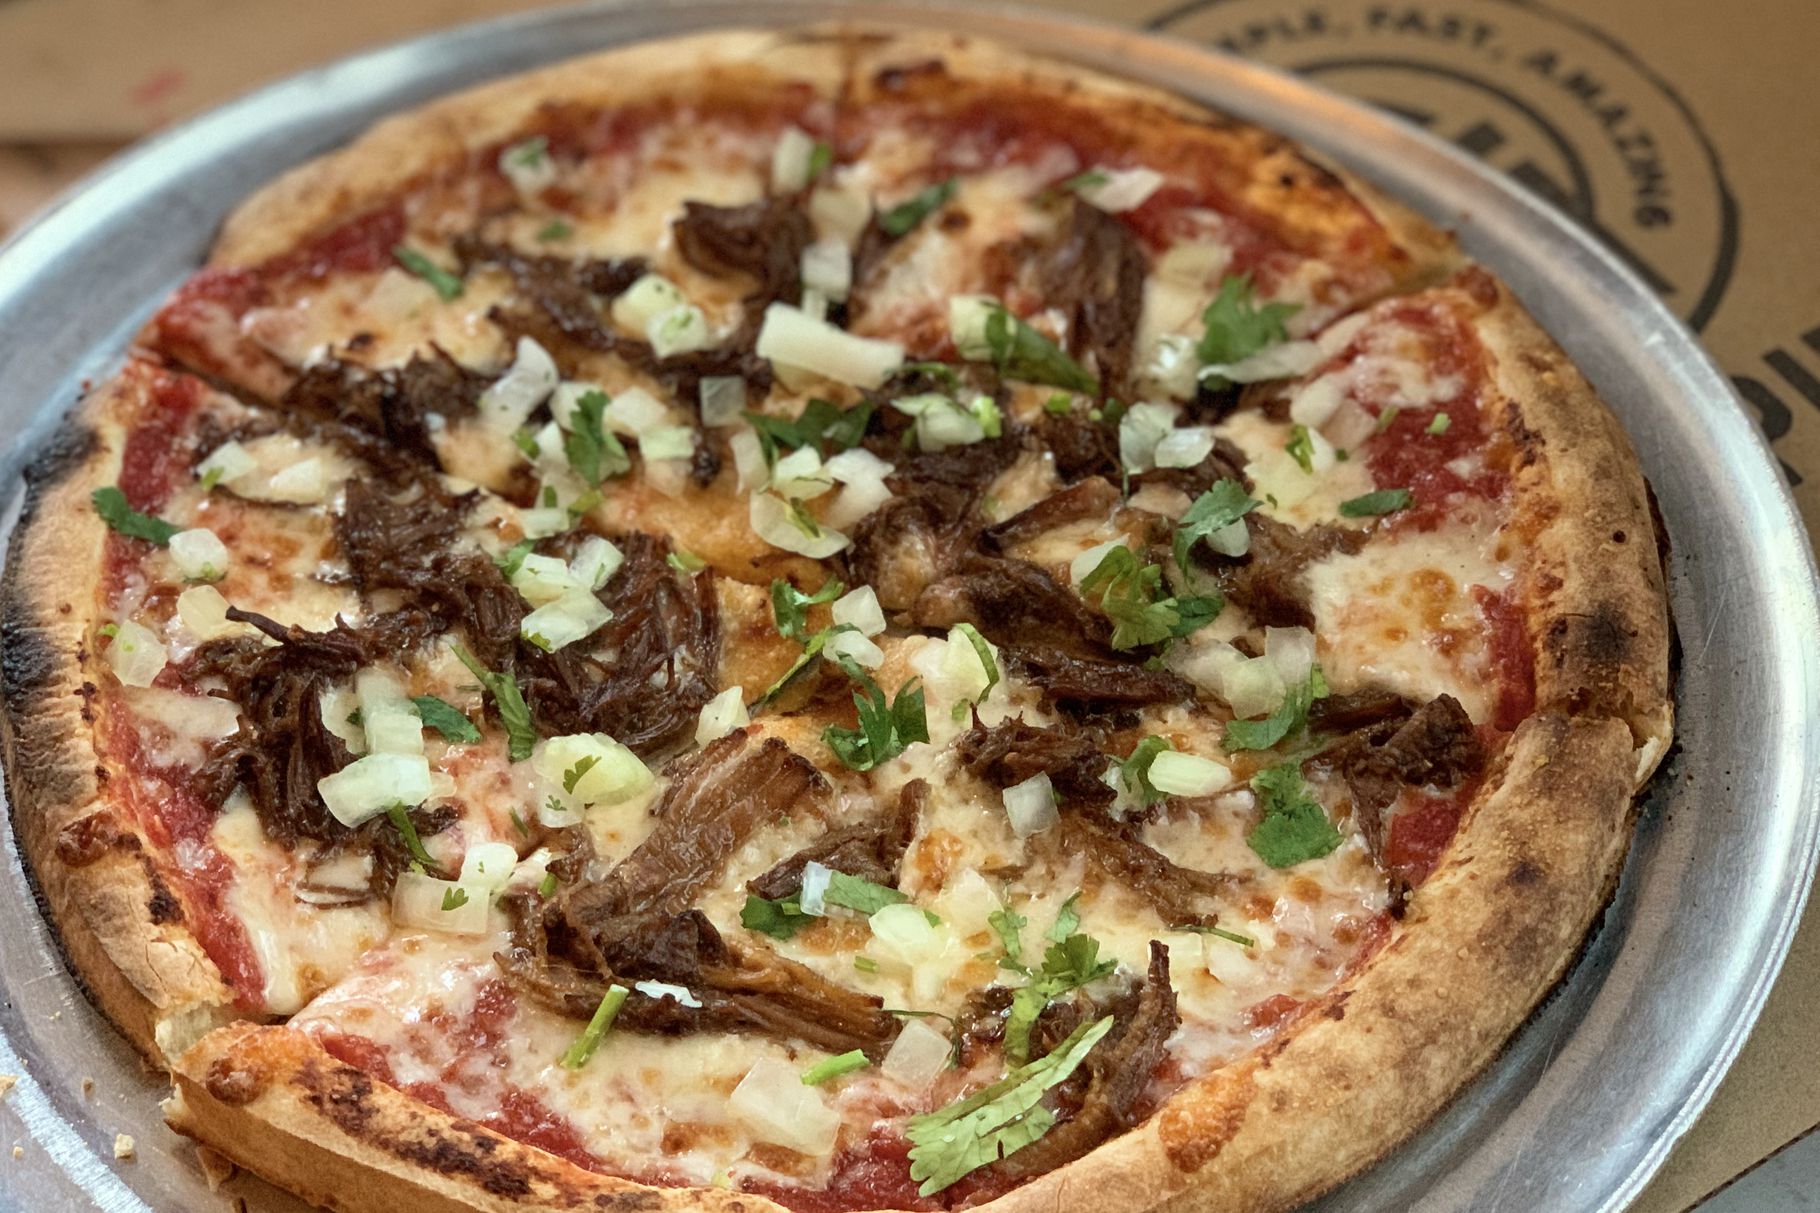 Mission Pizza Delivery Startup Firepie Is Now Selling Wood-Fired Pizzas